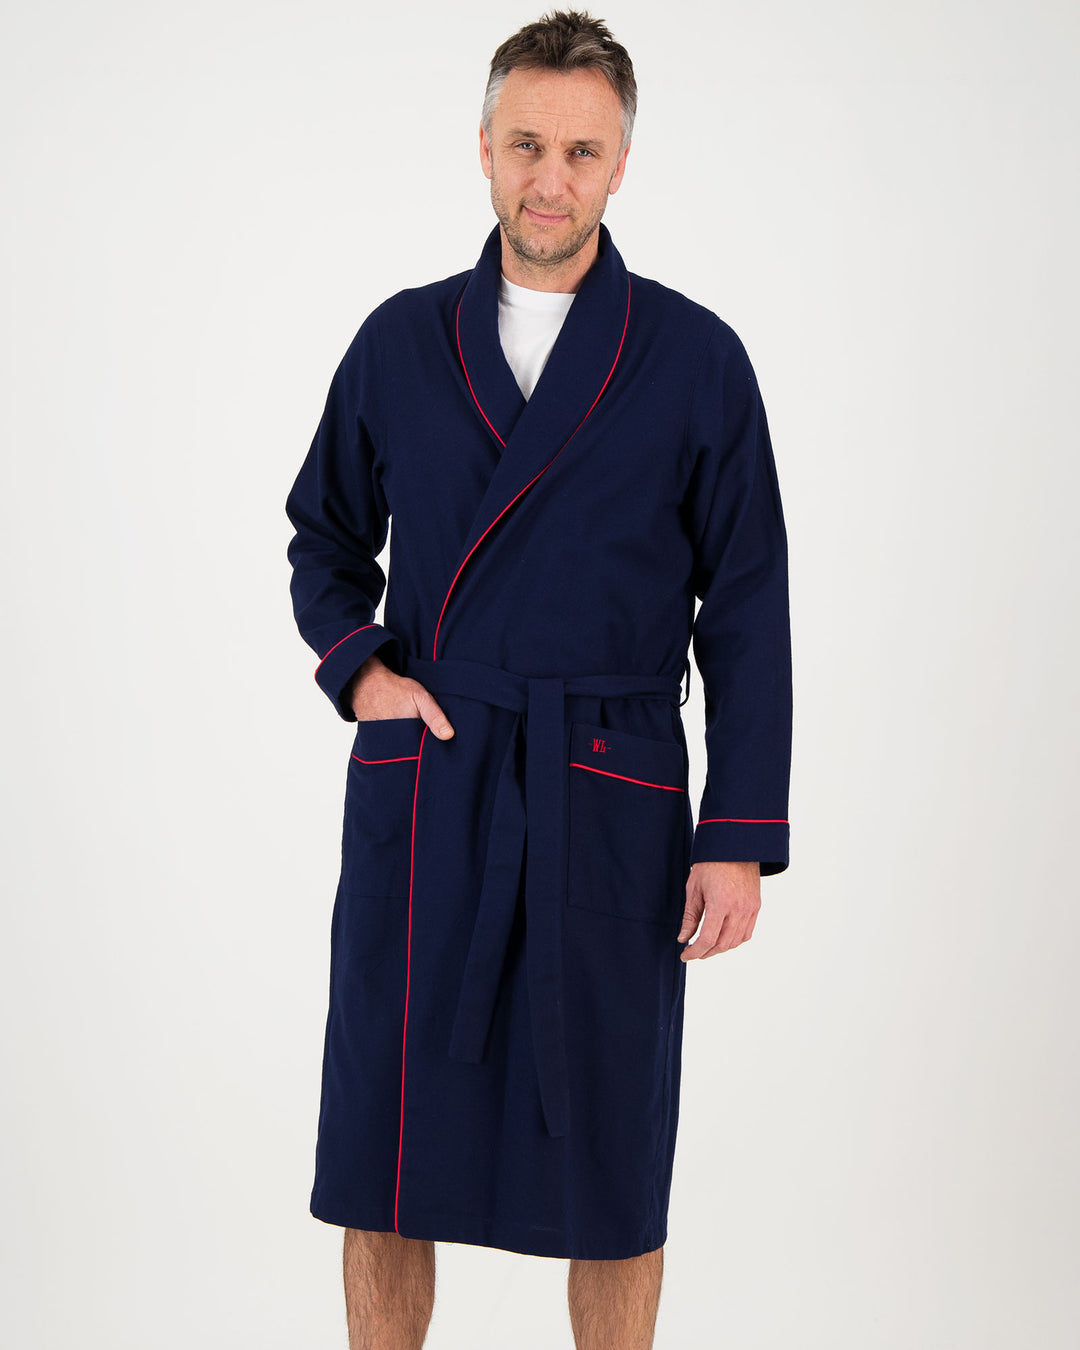 Mens Flannel Gown Navy with Red Piping Front - Woodstock Laundry SA